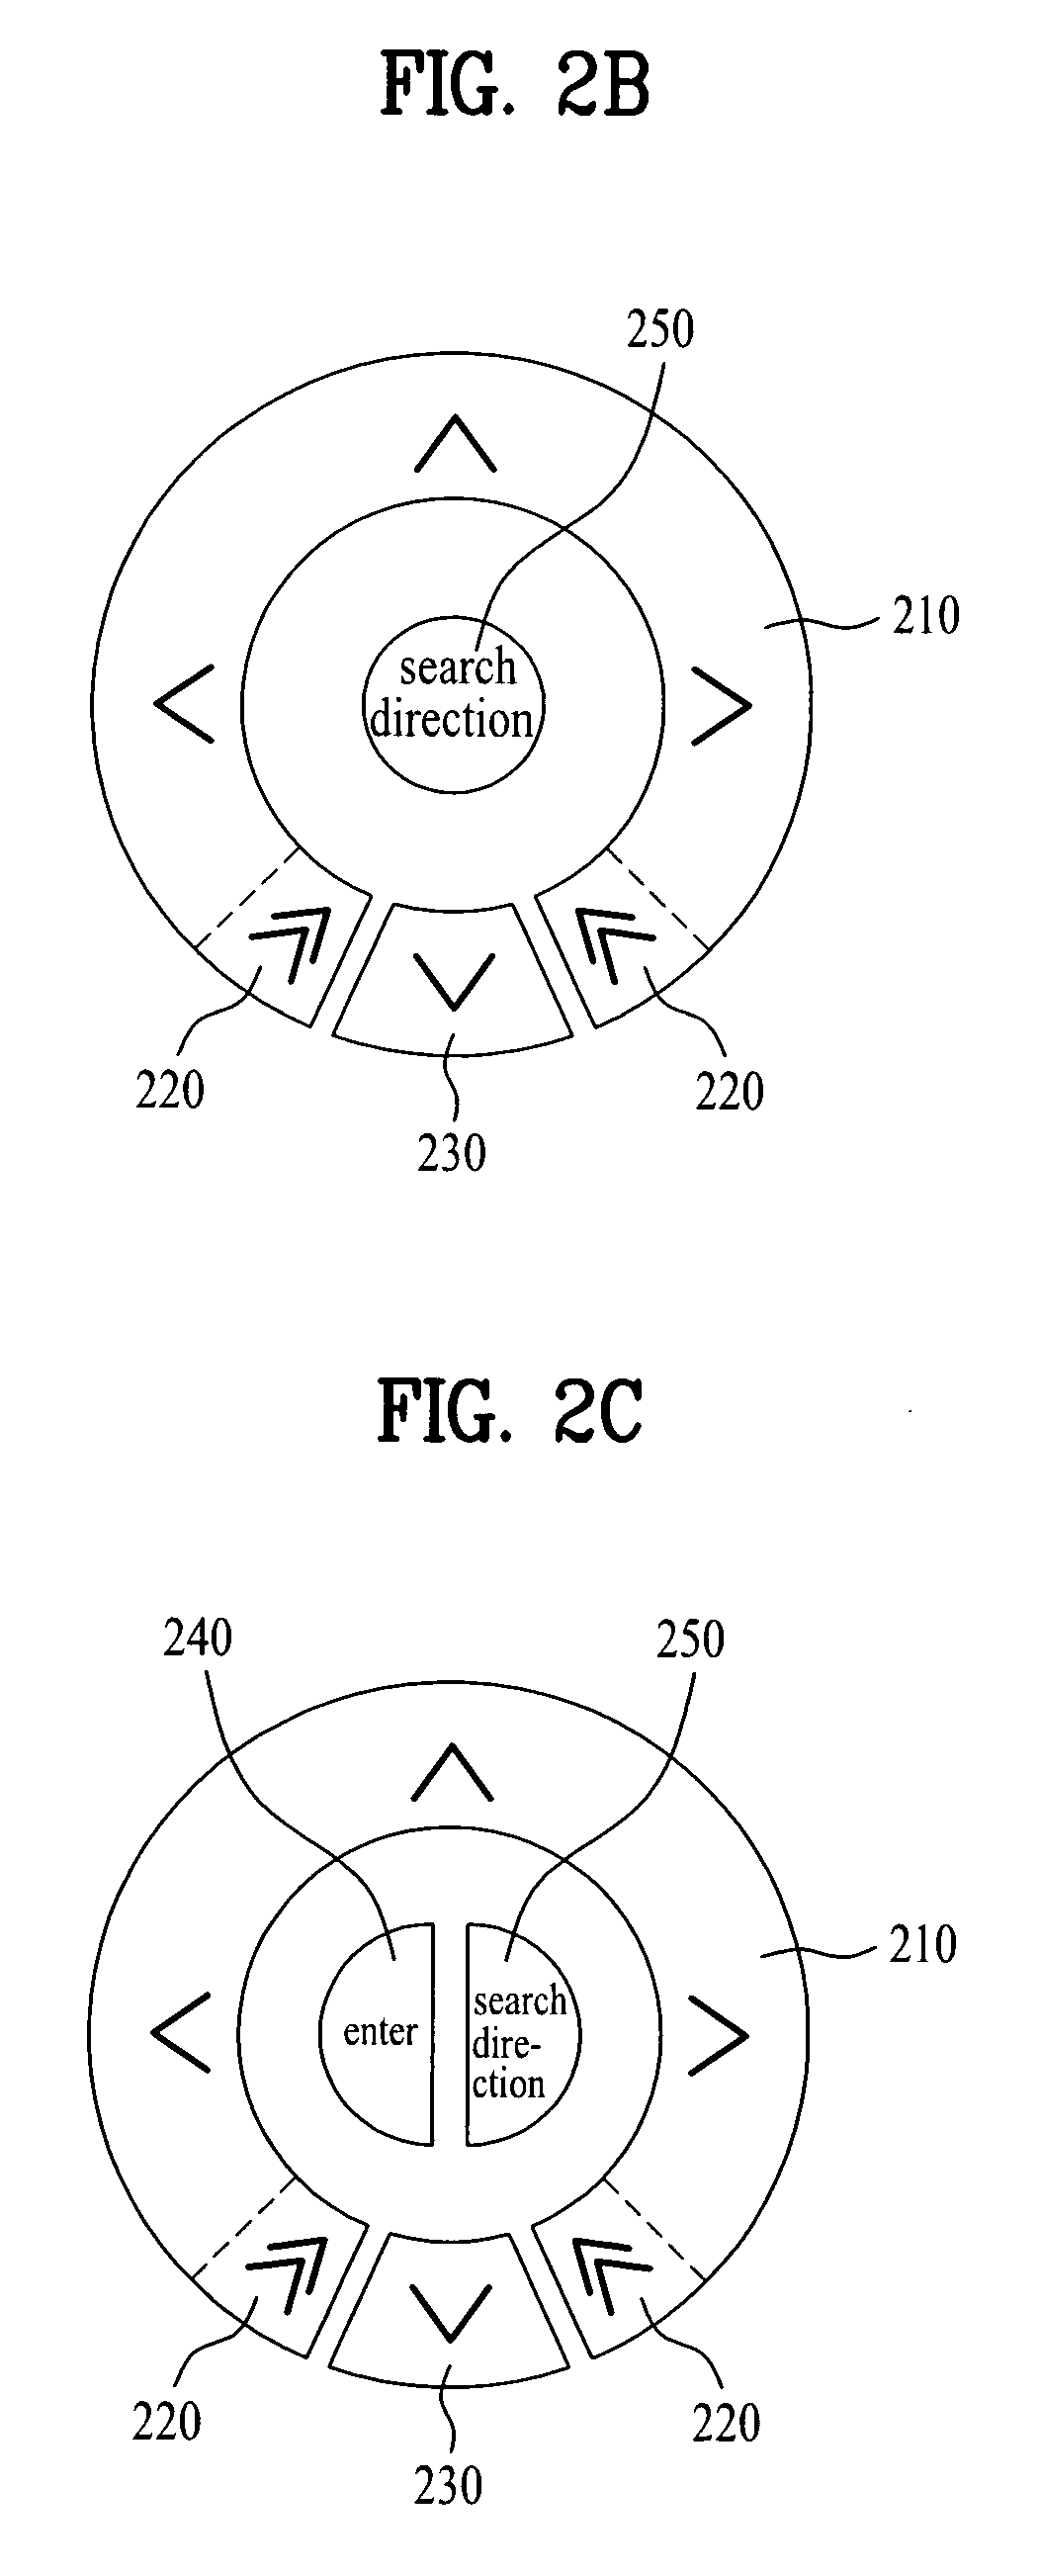 Mobile communication terminal having content data scrolling capability and method for scrolling through content data